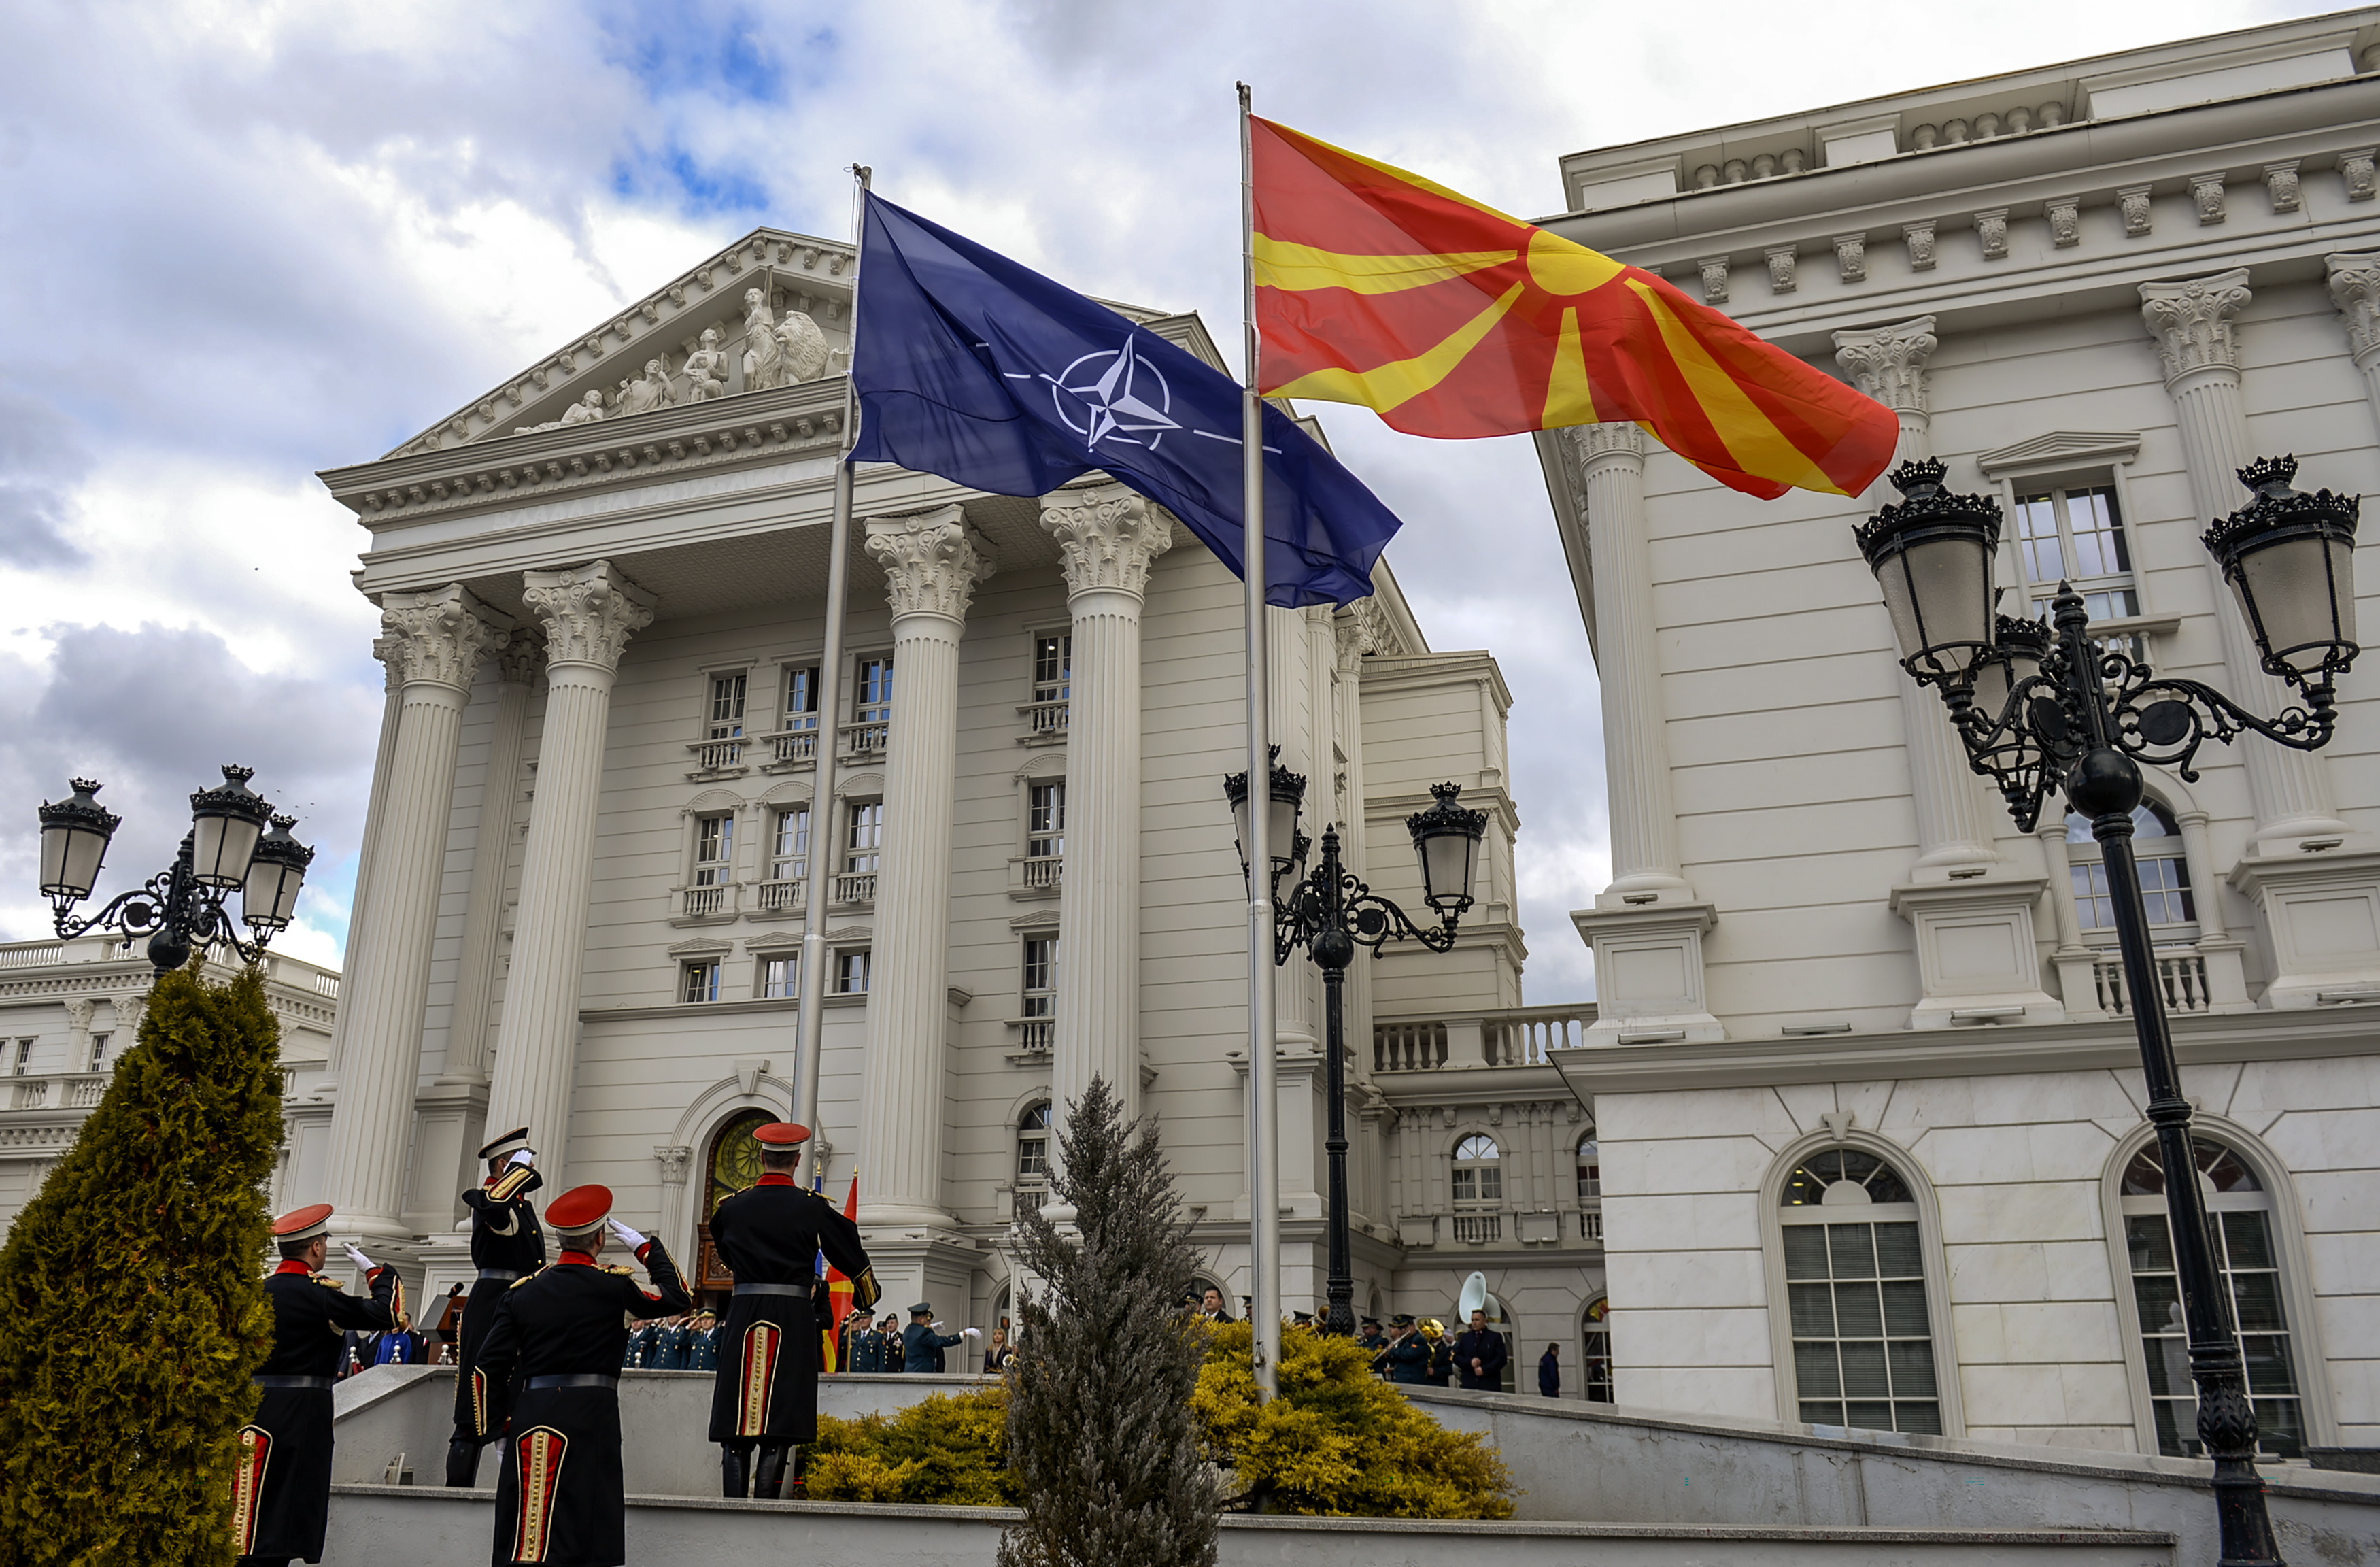 epa07364096 Members of a honor guard hoist the NATO flag alongside the Macedonian flag in front of the government building in Skopje, The Former Yugoslav Republic of Macedonia (FYROM), 12 February 2019. The former Yugoslav Republic of Macedonia's government is due to change the name of the country after the ratification of the 'Protocol of the North Atlantic Treaty for the Accession of North Macedonia' whereby Greece will approve the accession of its northern neighbor to NATO under its new name, as provided by the Prespes Agreement signed by Athens and Skopje.  EPA/GEORGI LICOVSKI